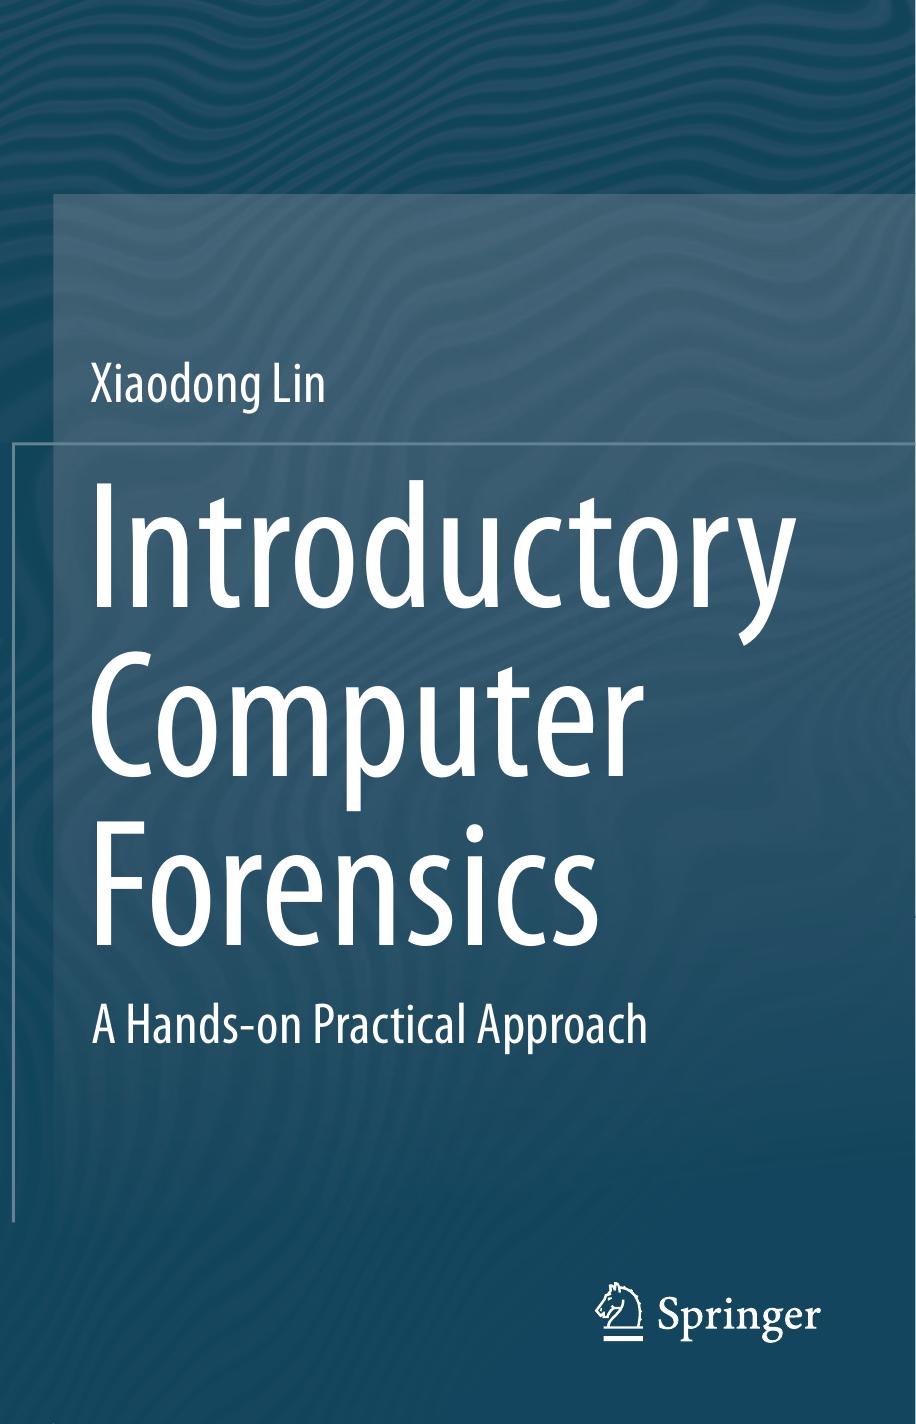 Introductory Computer Forensics by Xiaodong Lin